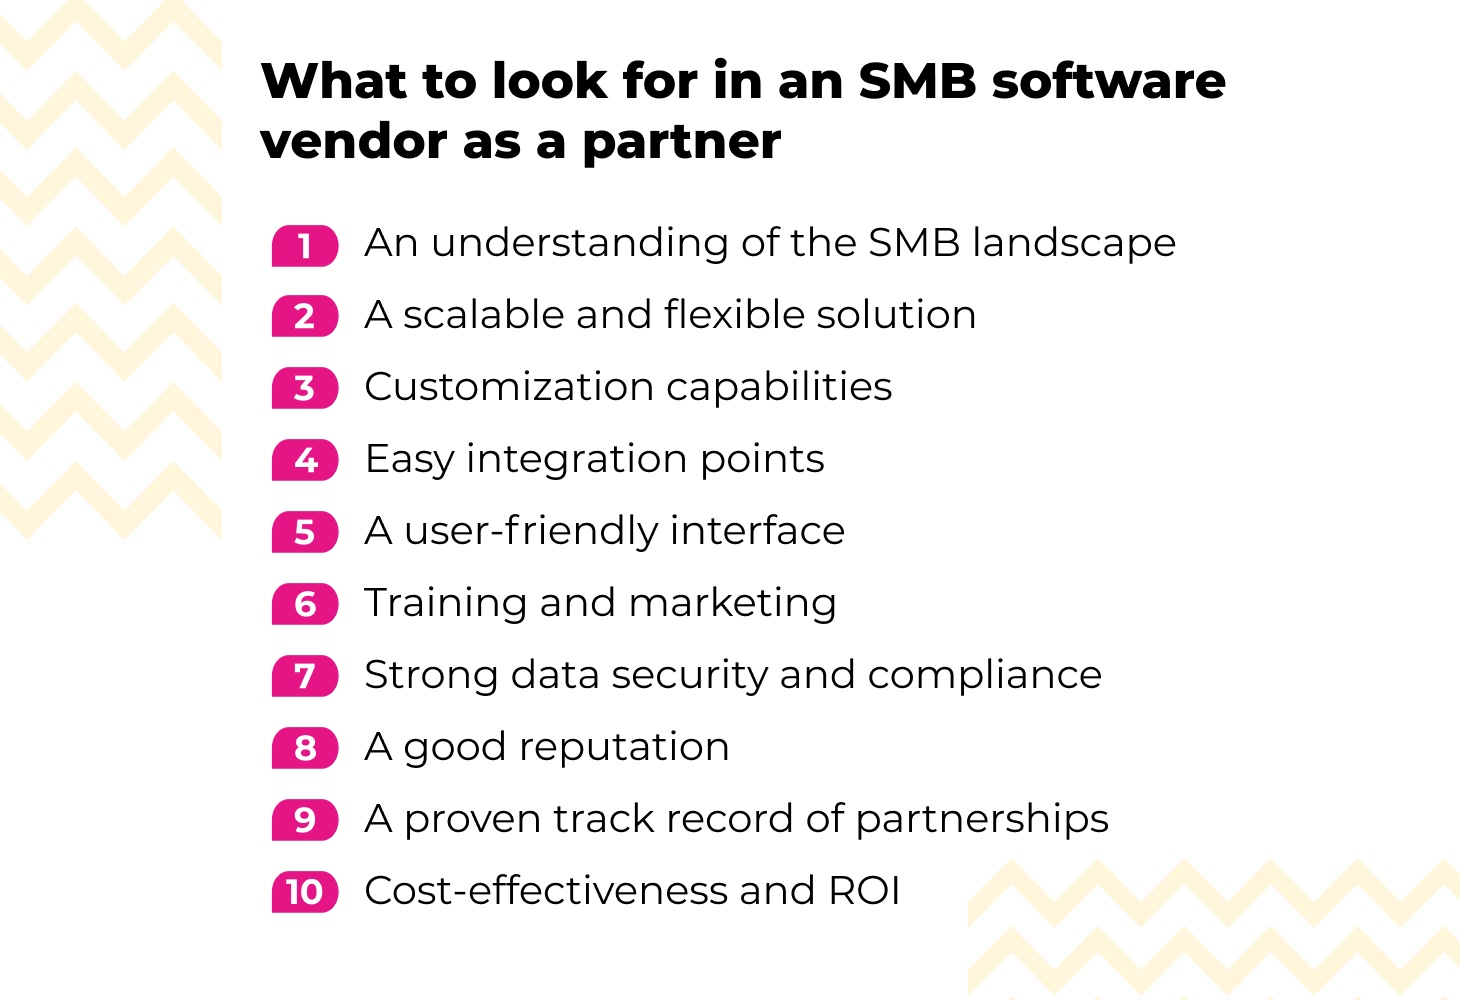 Top 10 things to look for in an SMB software vendor as a partner